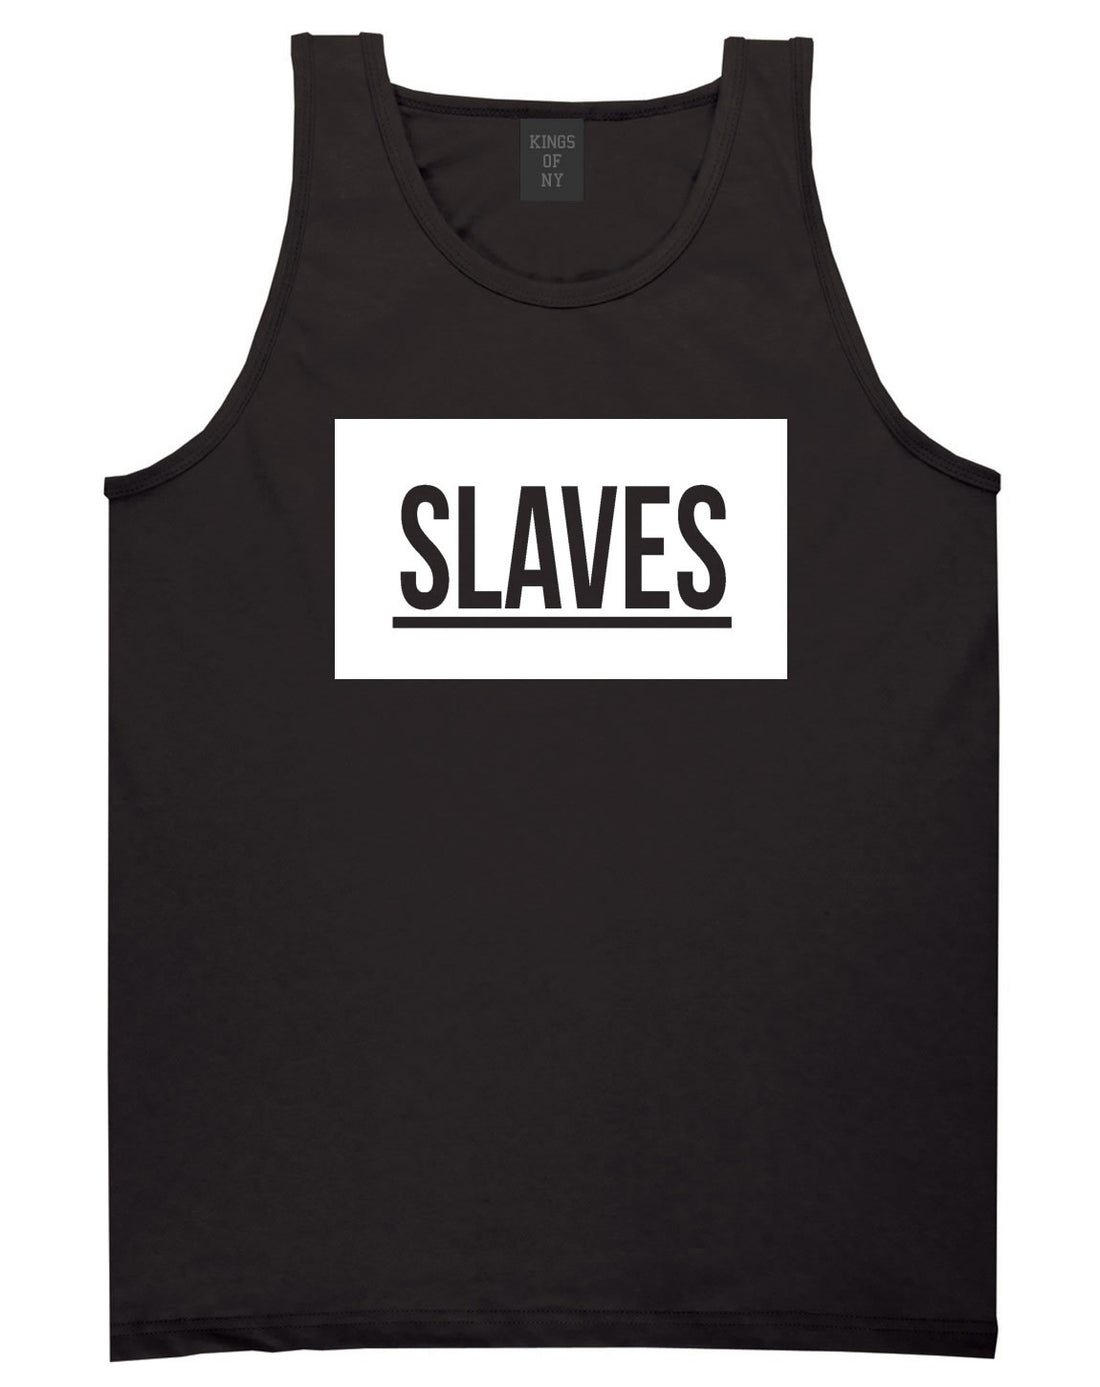 Slaves Fashion Kanye Lyrics Music West East Tank Top In Black by Kings Of NY